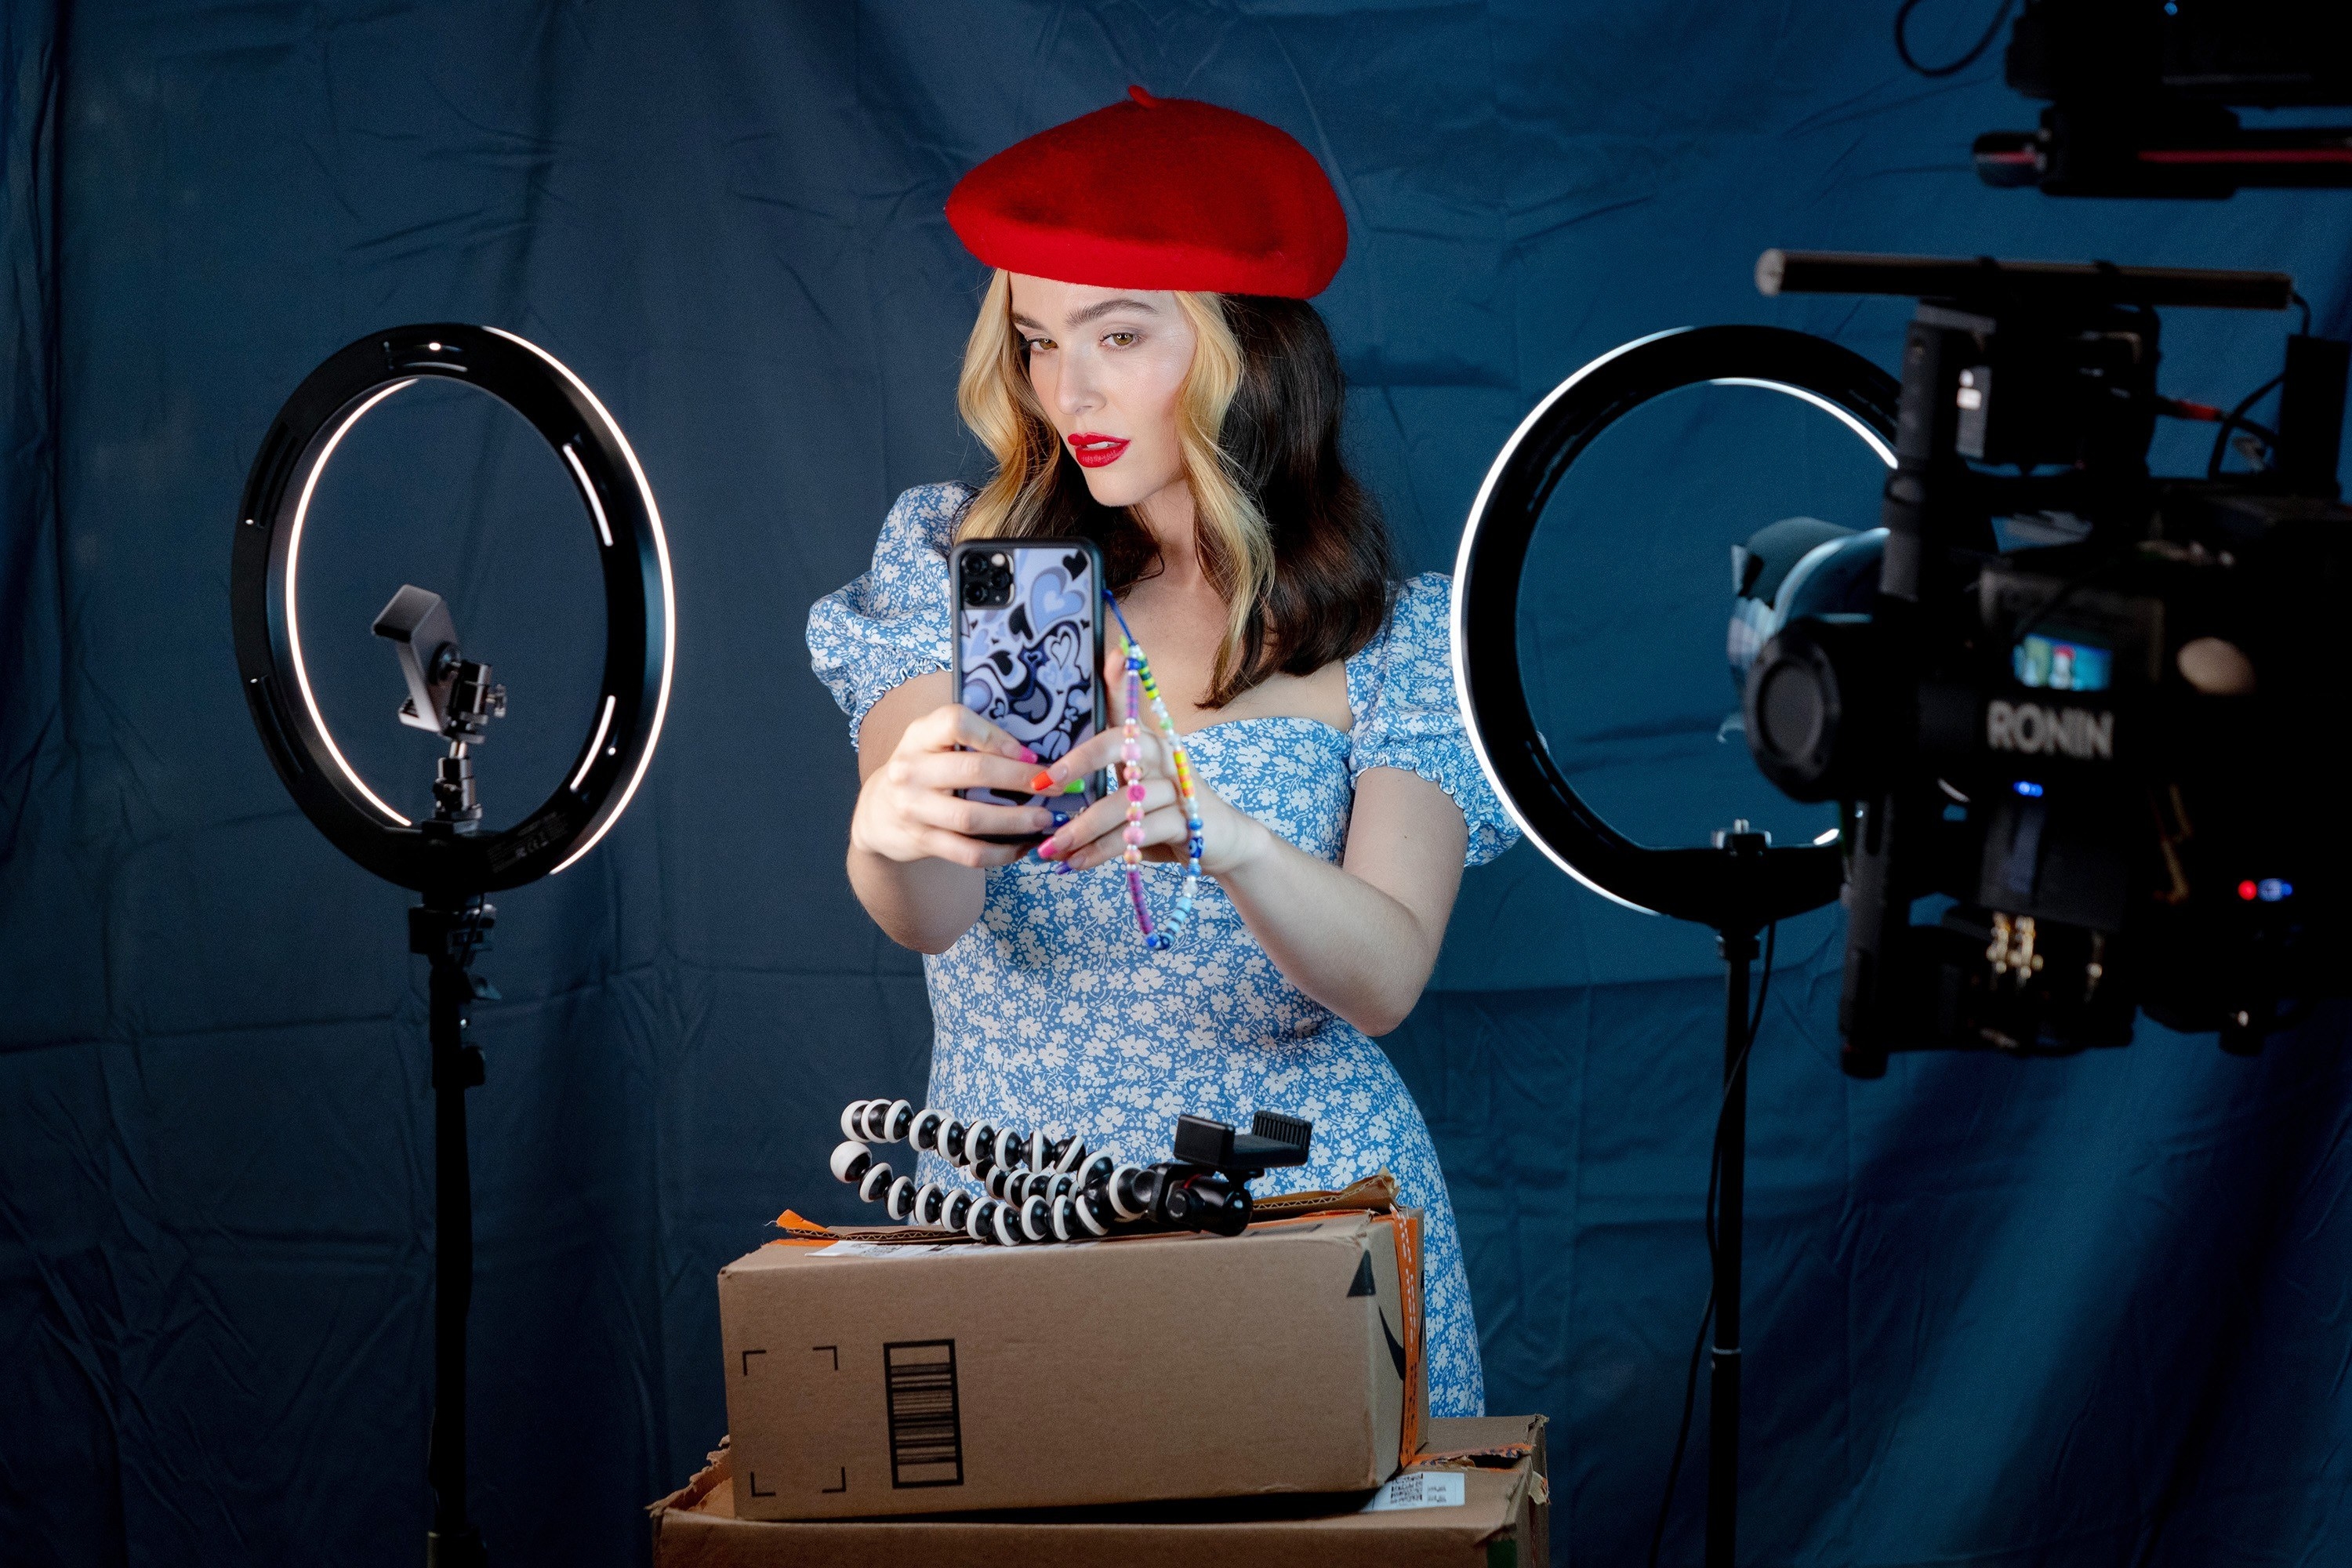 A woman in a beret takes a selfie